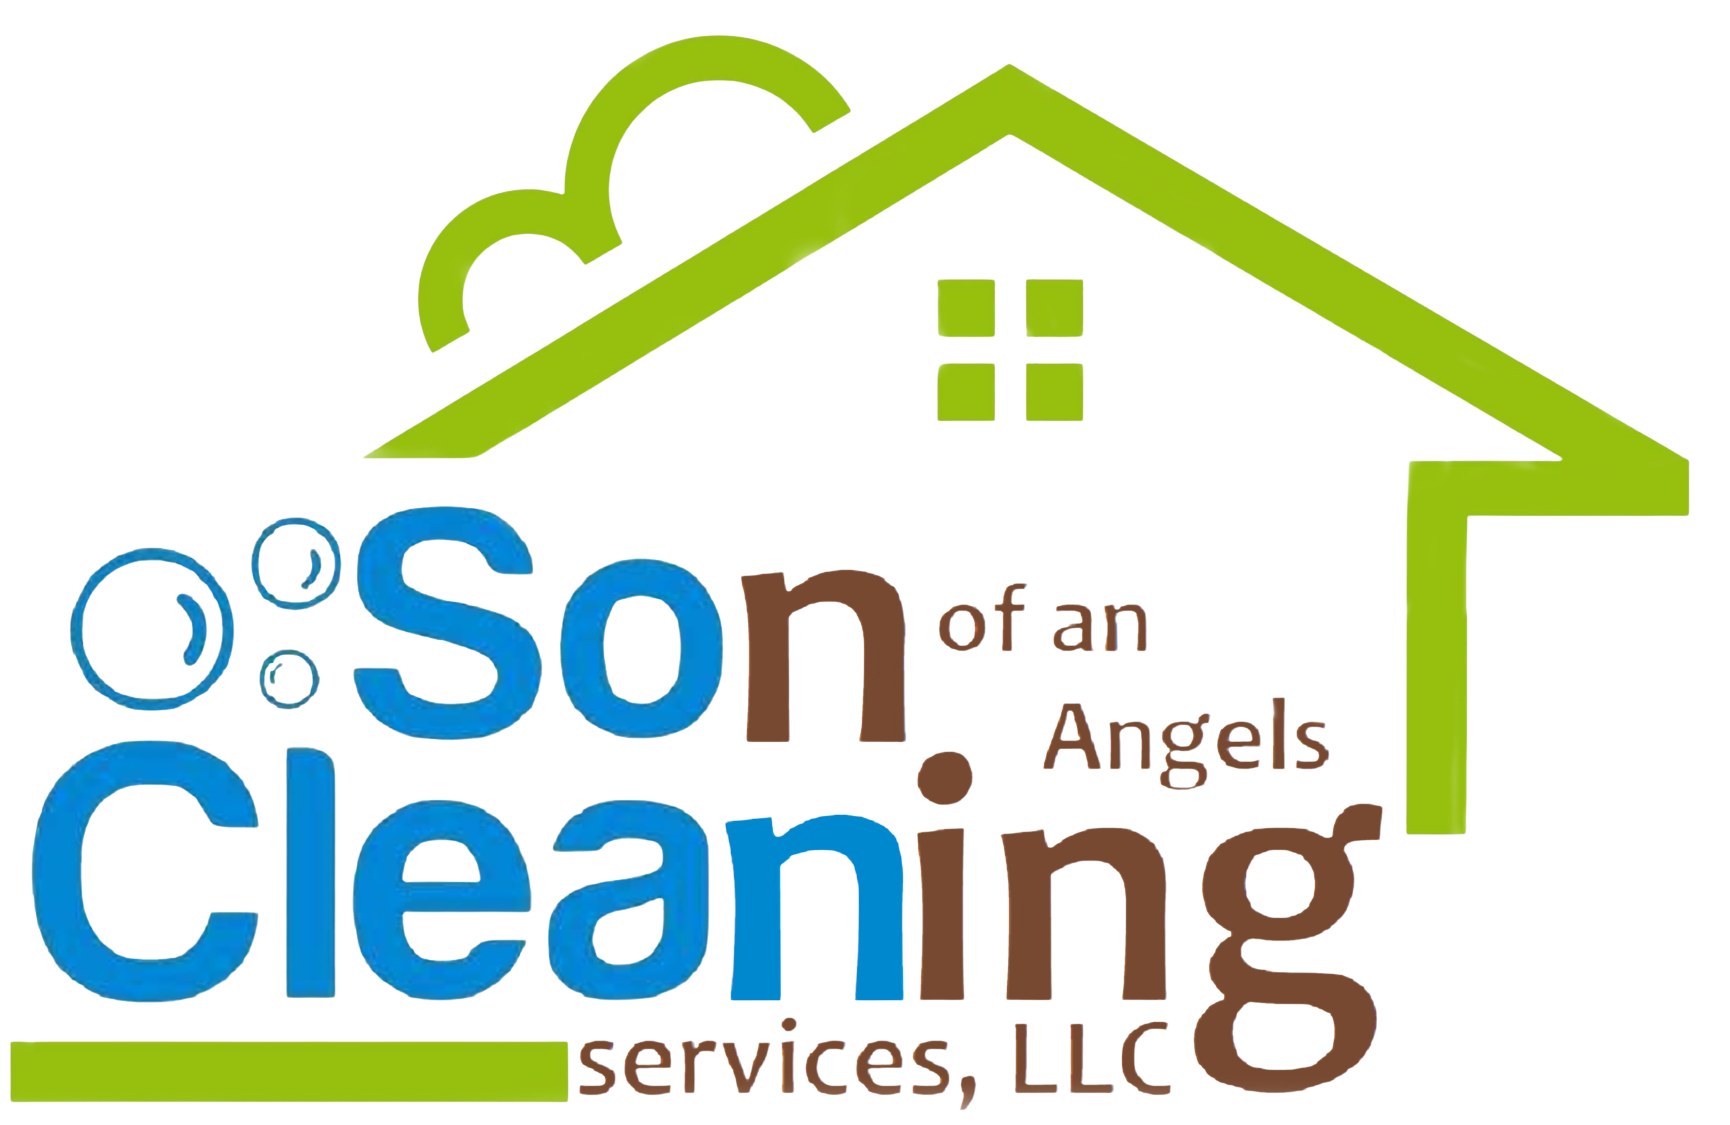 Son of an Angel's Green Cleaning Services, LLC Logo